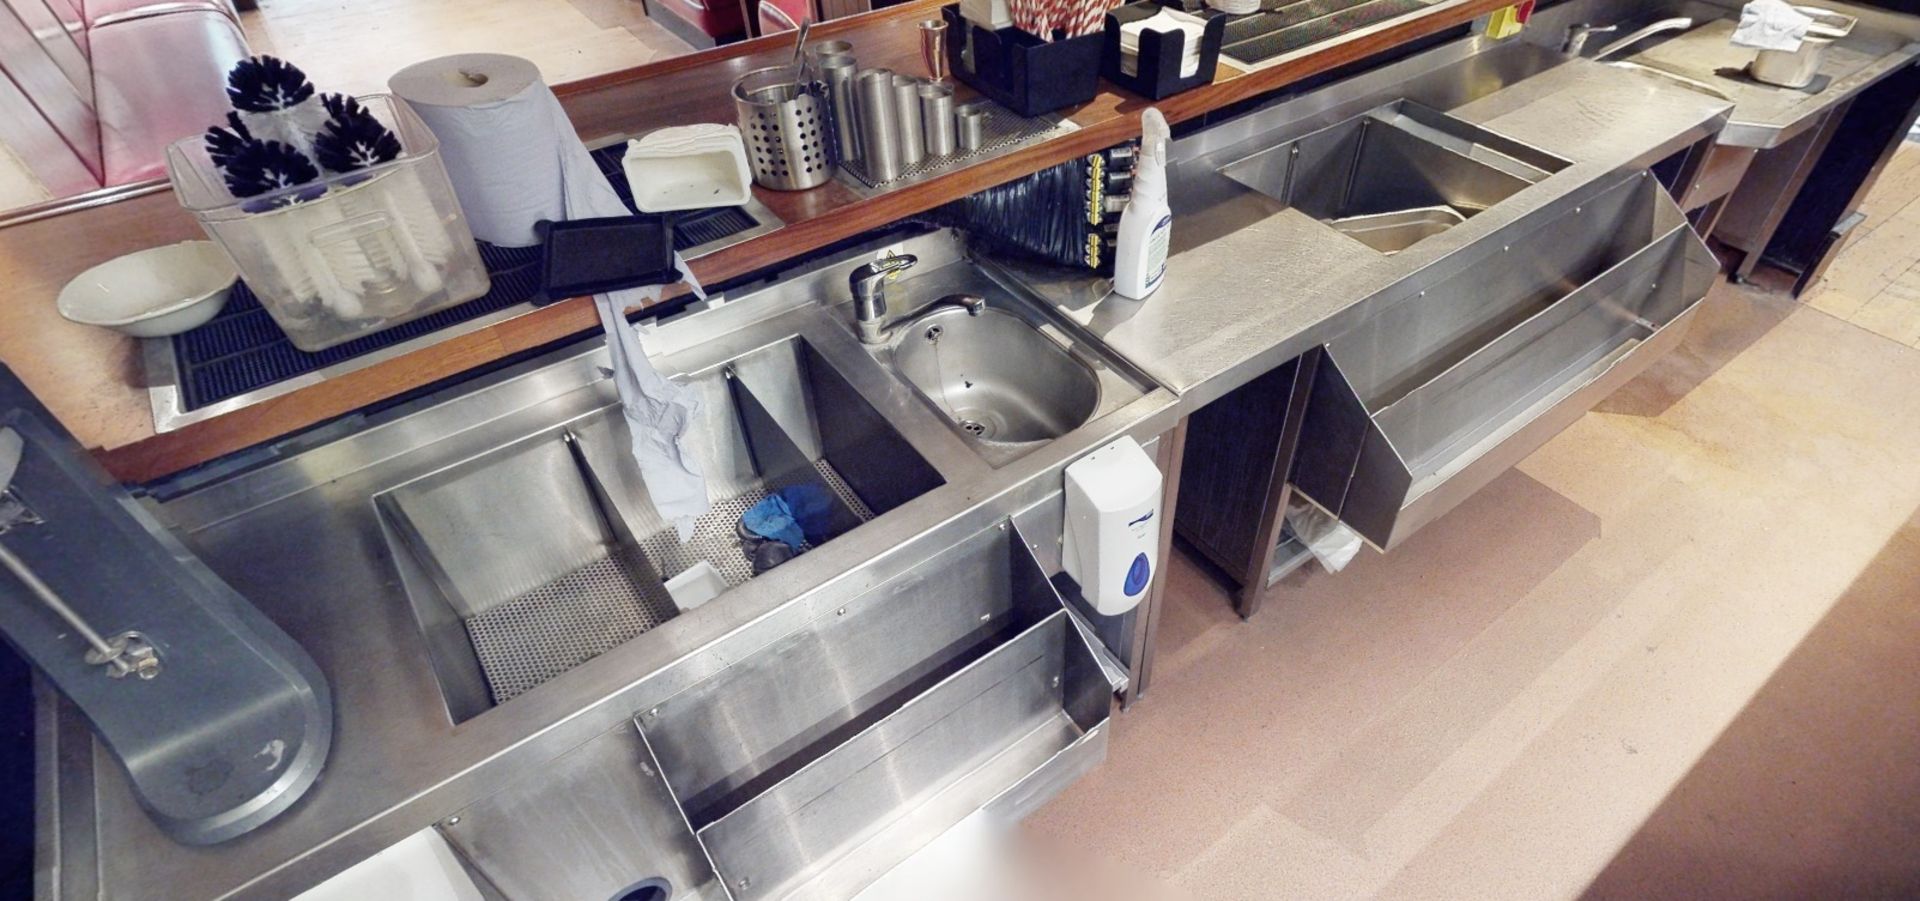 Selection Of 3 x Stainless Steel Back Bar Units Including Prep Area, Ice Wells, Sink Basins.